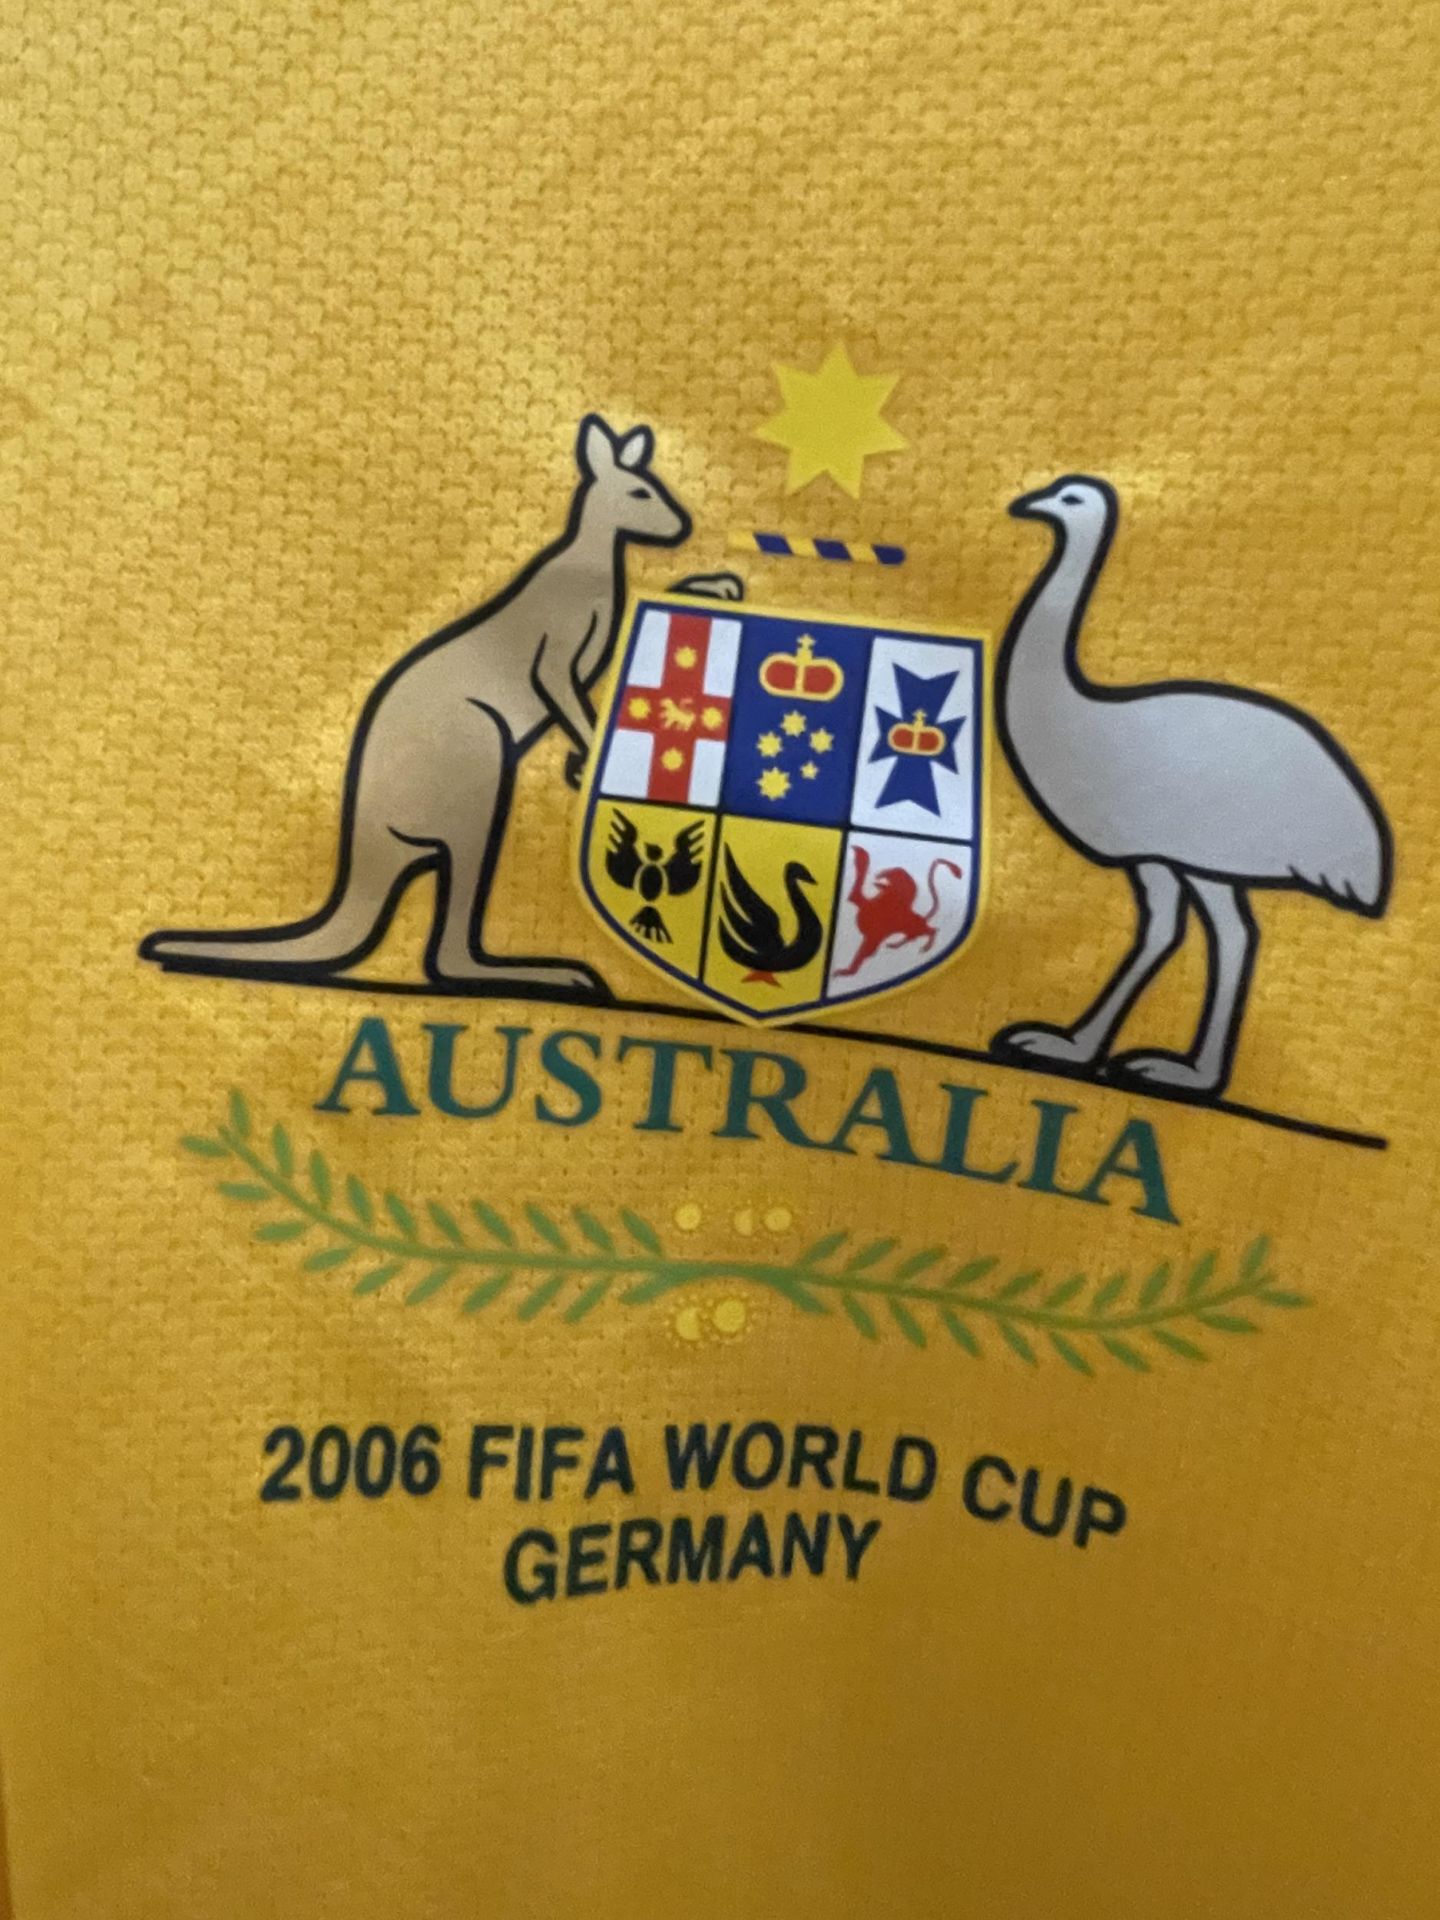 A SIGNED AUSTRALIAN FIFA 2006 WORLD CUP, GERMANY SHIRT - Image 2 of 9